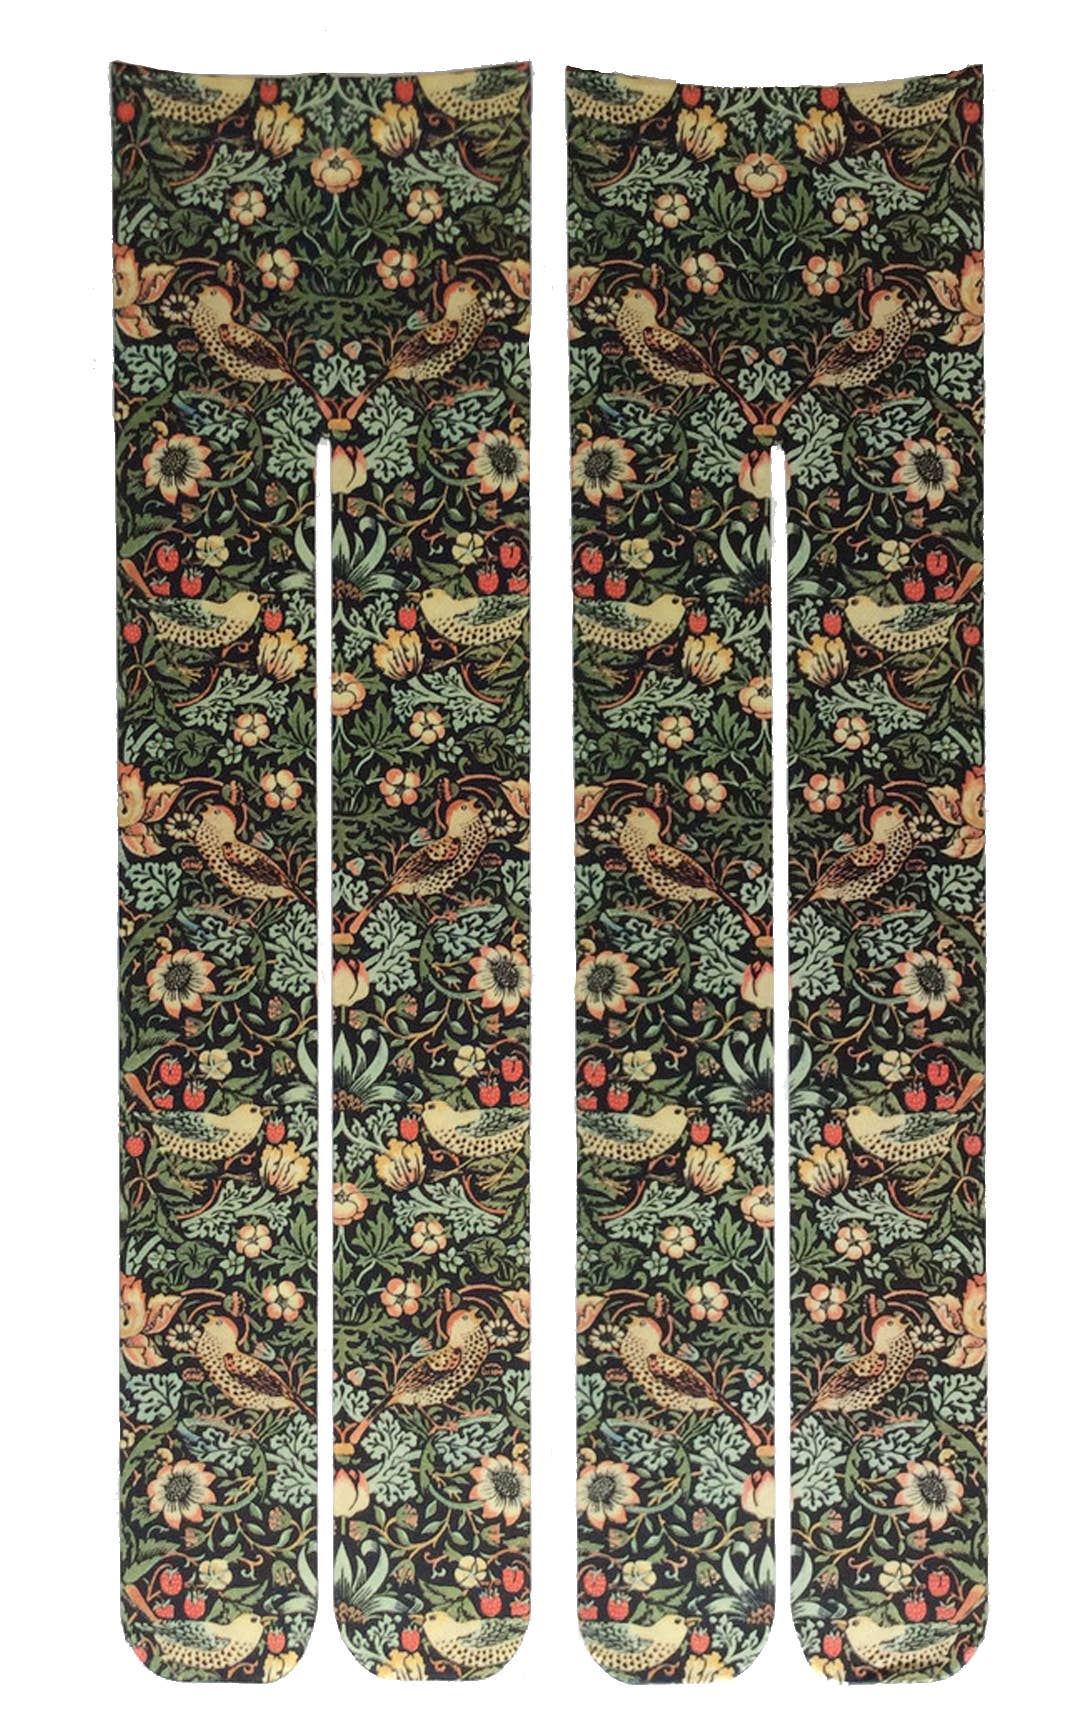 Instant Shipping! STRAWBERRY THIEF by WILLIAM MORRIS PRINTED TIGHTS